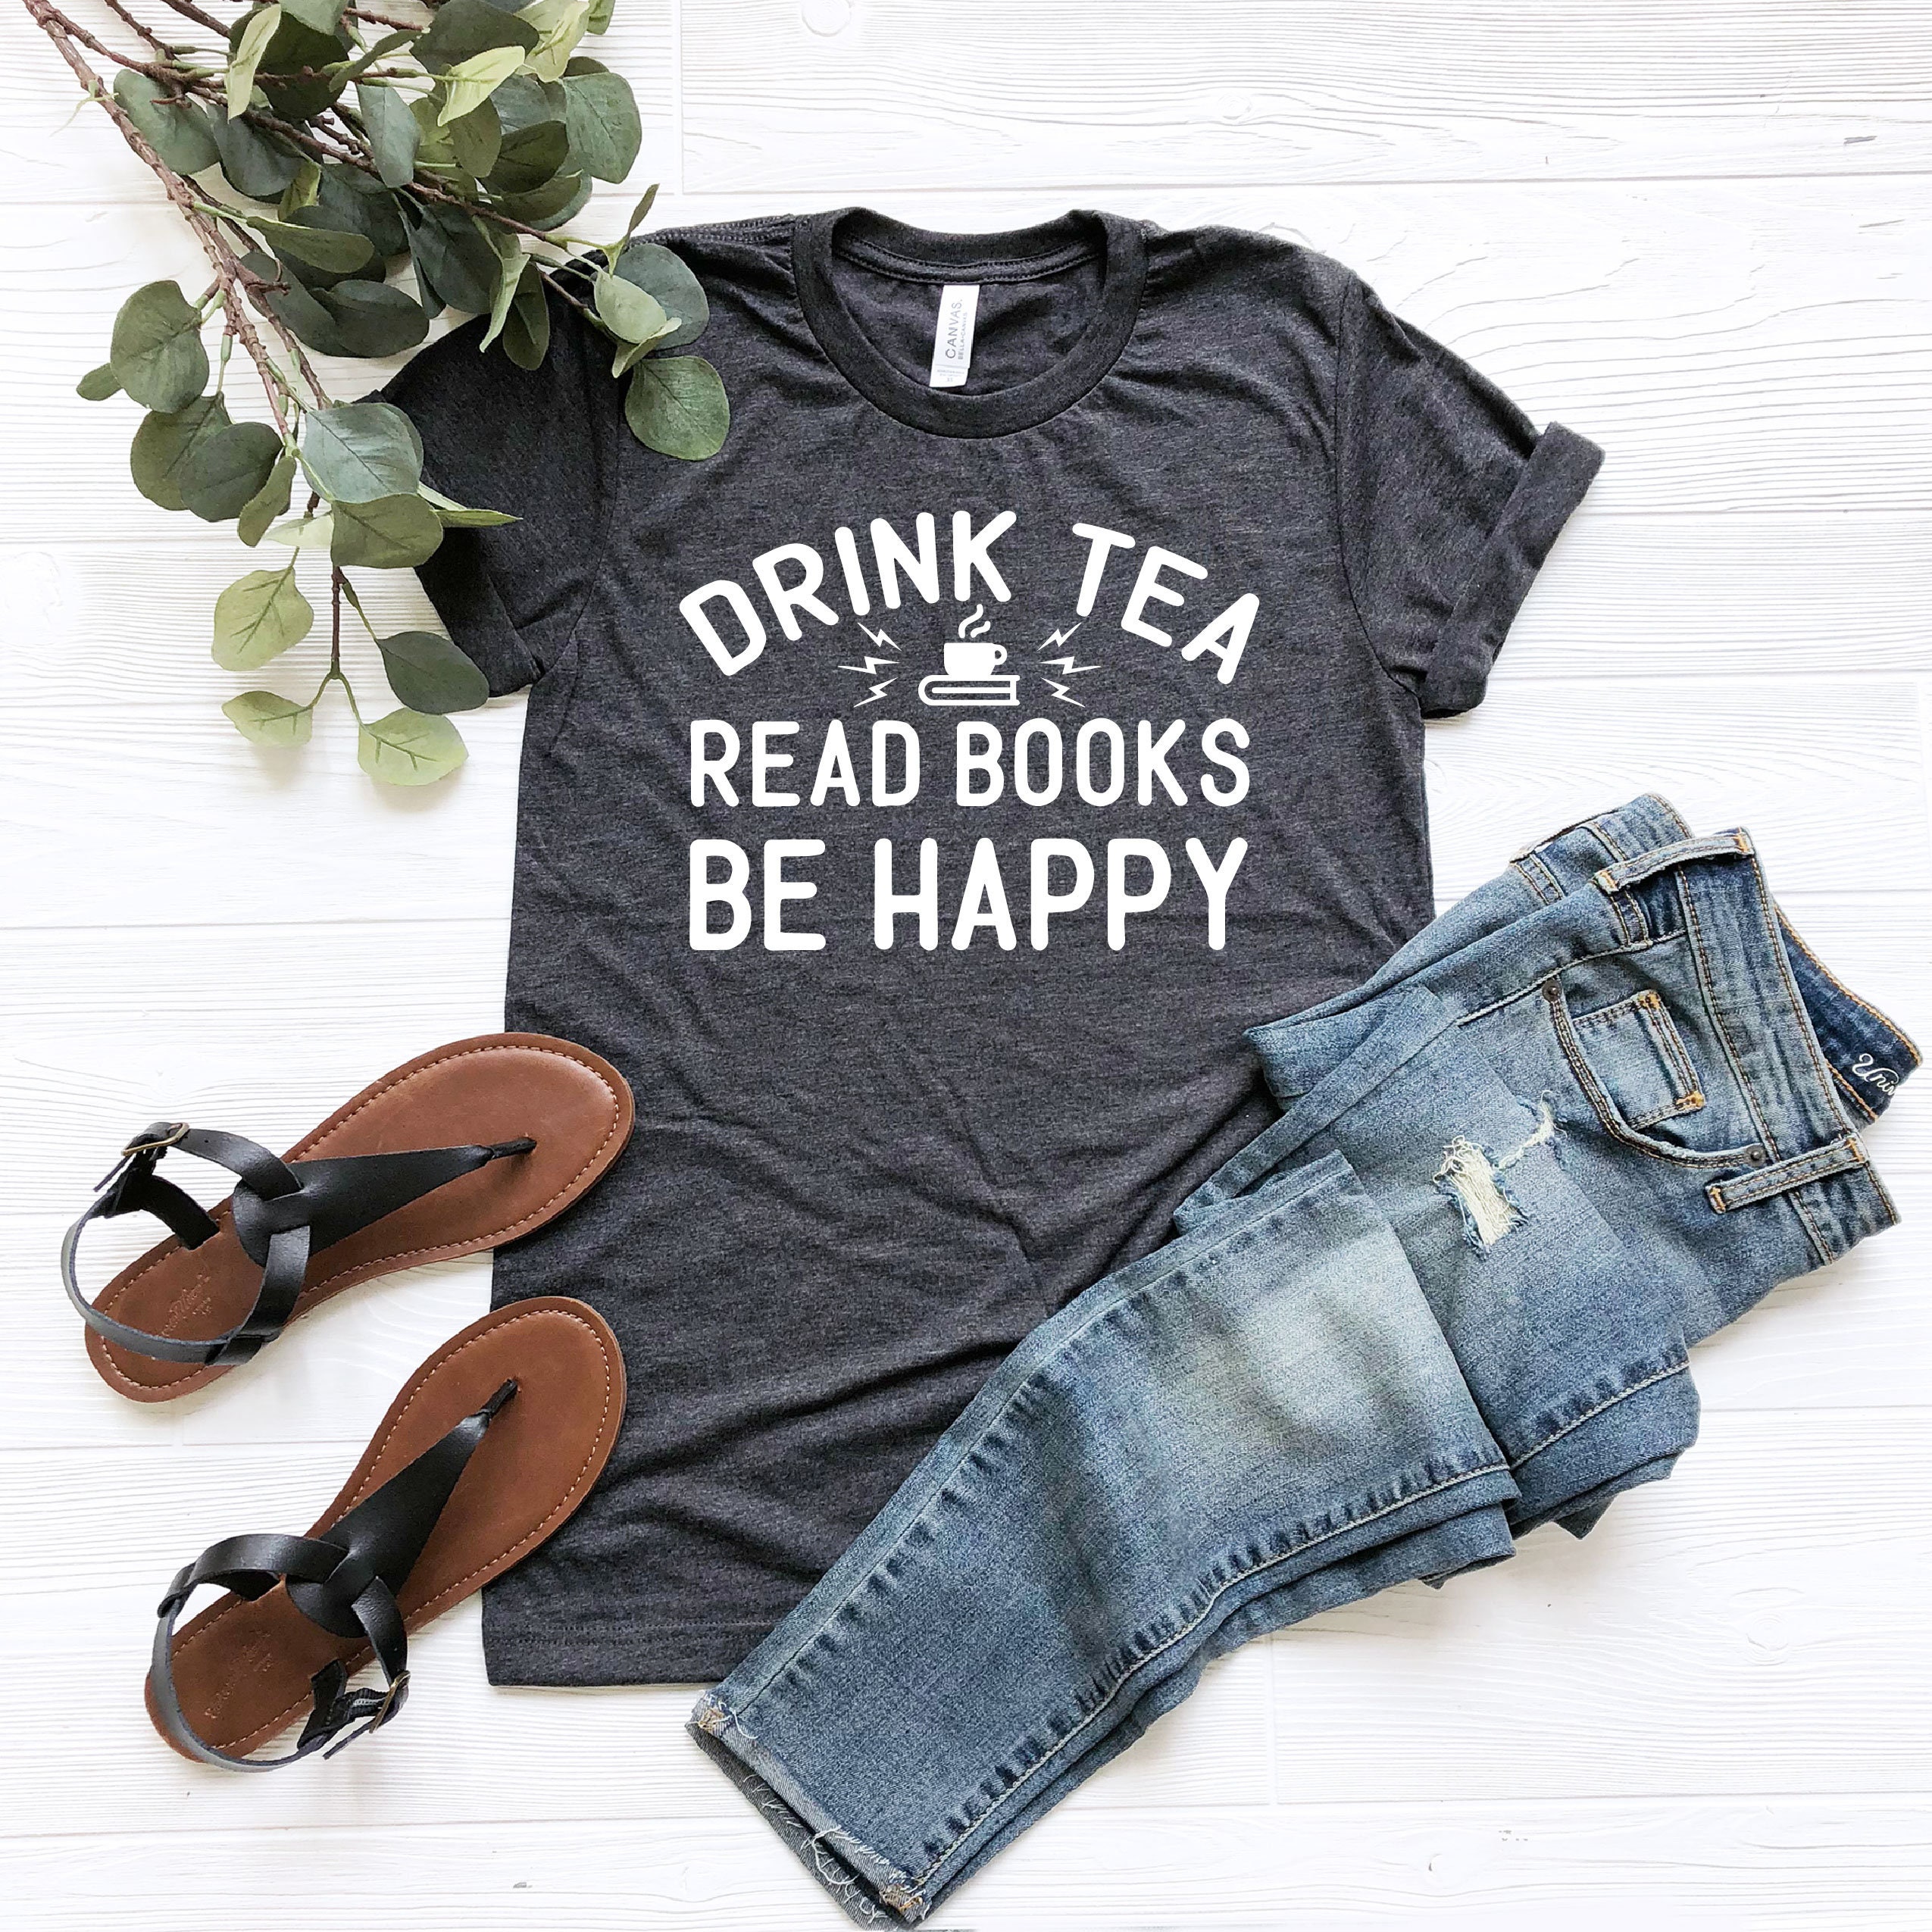 A Happy Shirt for a Happy Reader